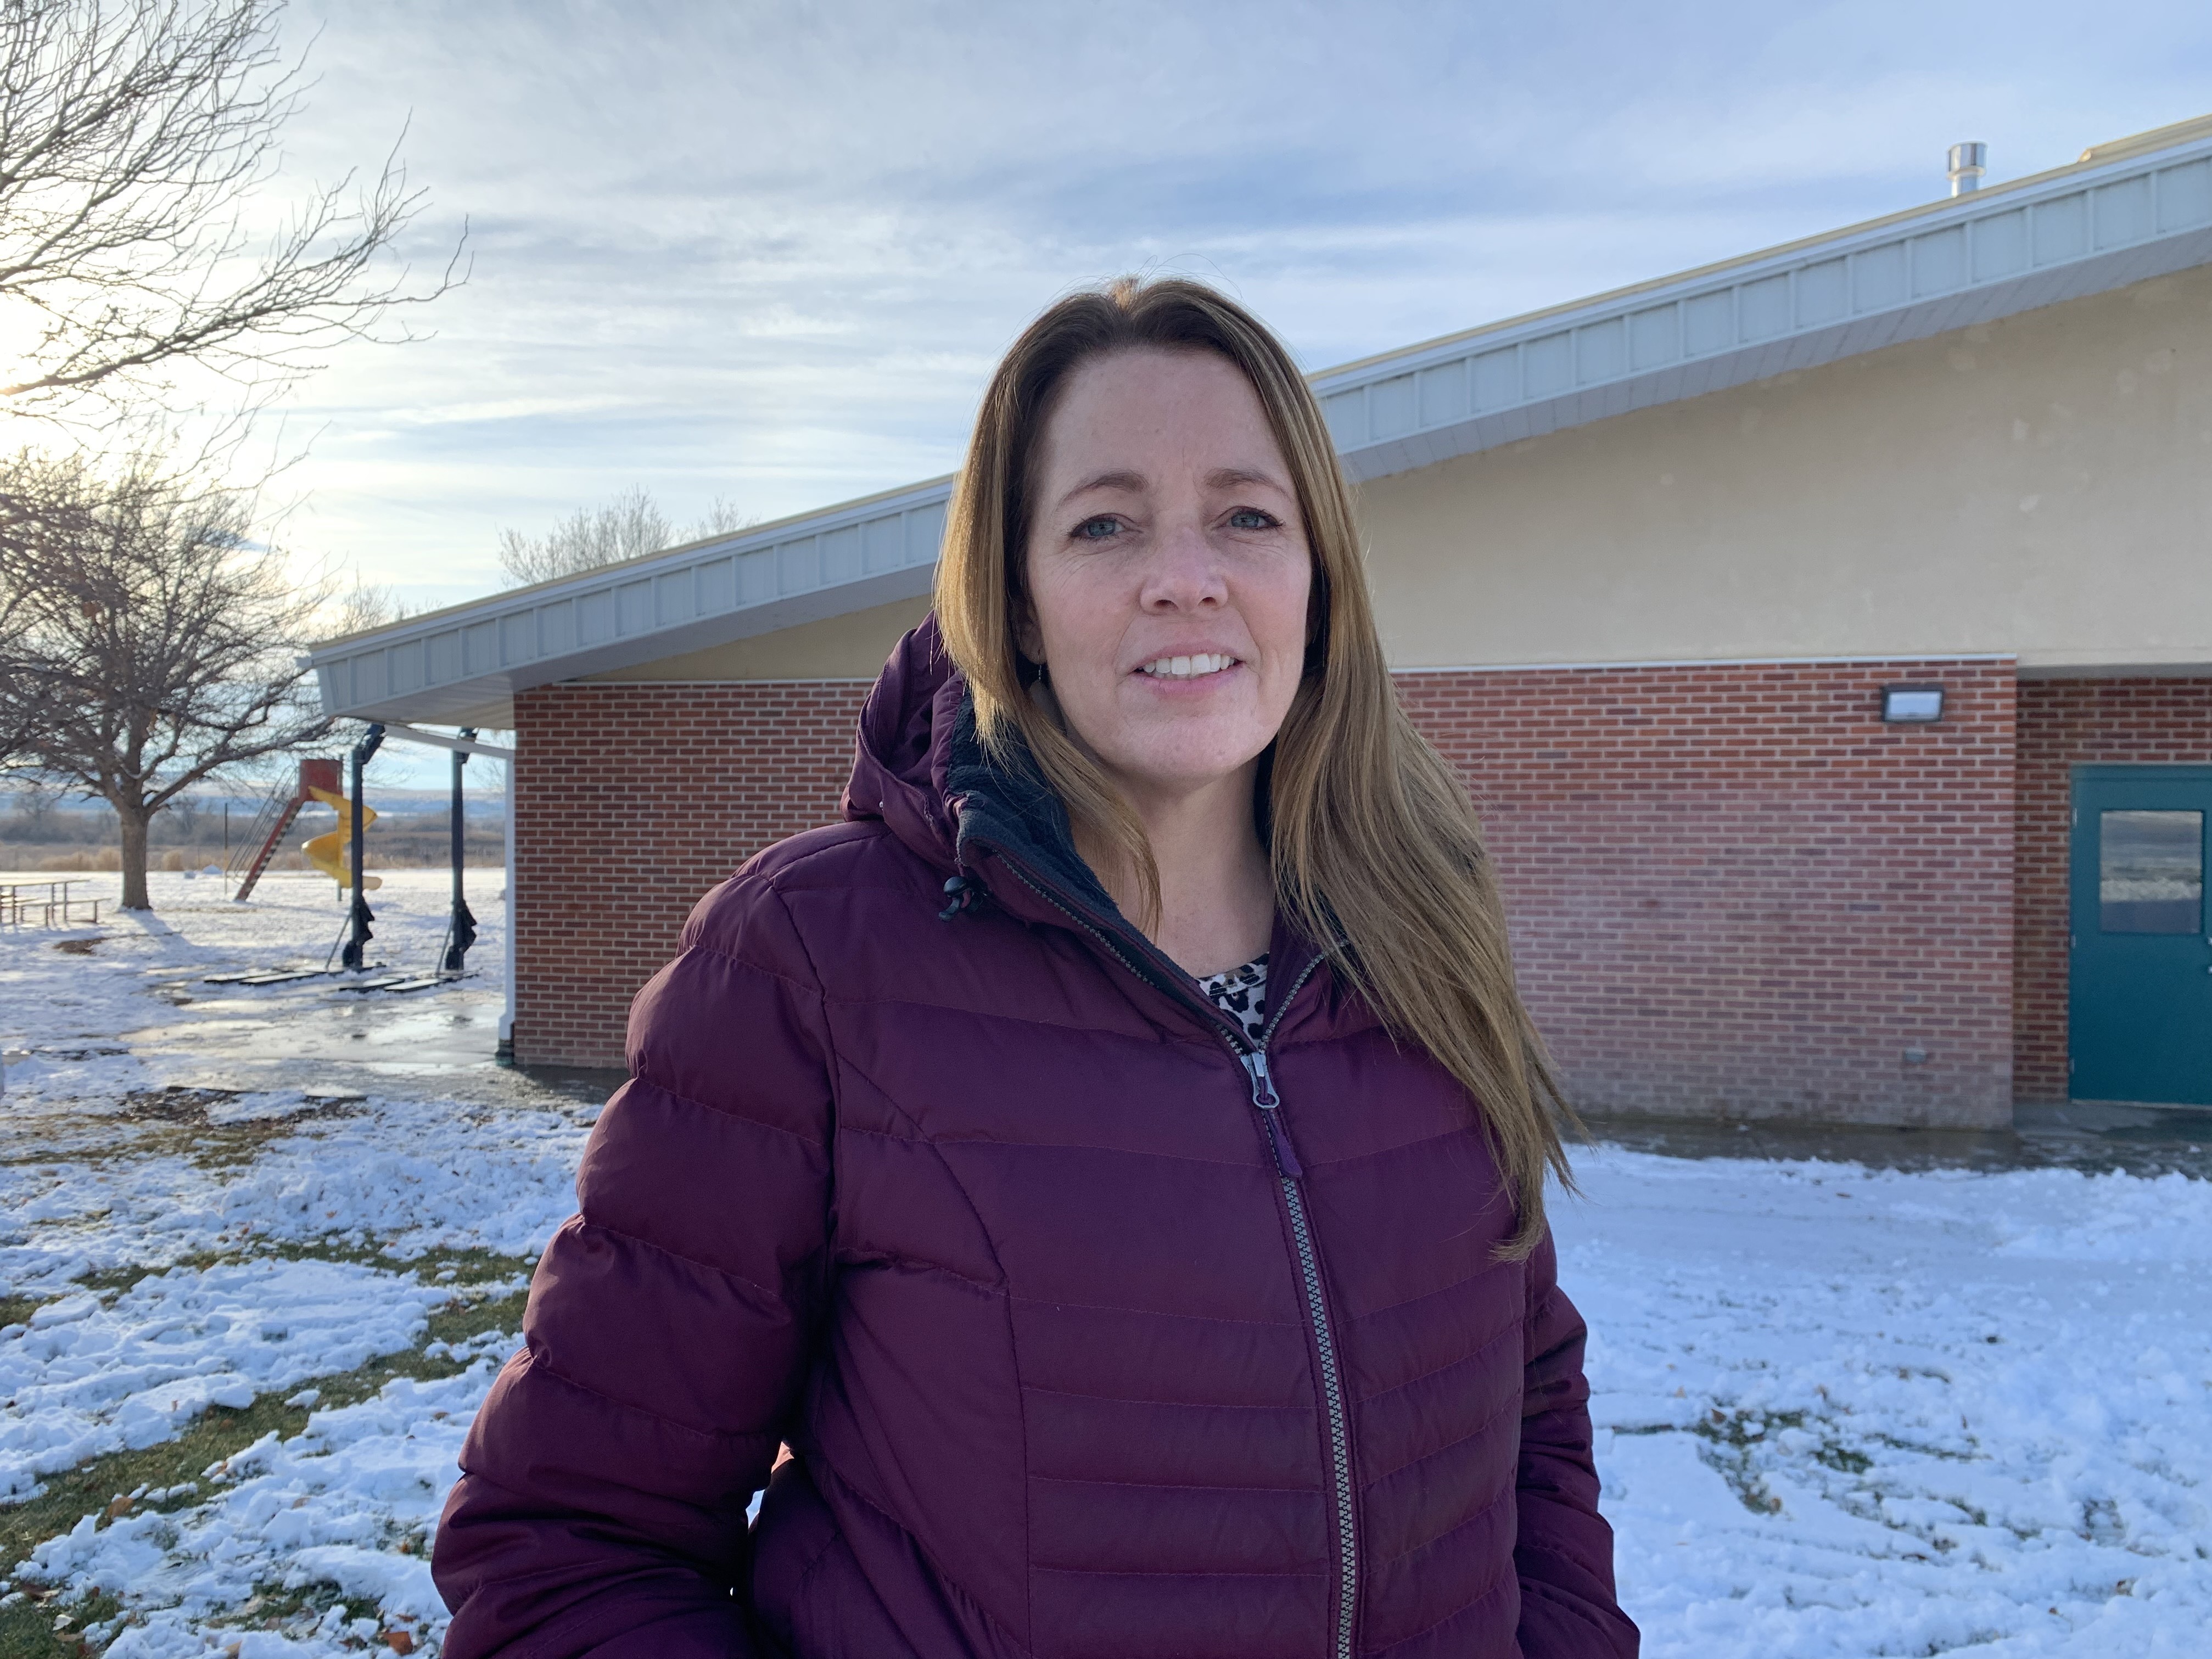 Elementary school teacher Sariah Pearson contracted COVID-19, suffering a fever and other symptoms for close to six weeks. CREDIT: Kirk Siegler/NPR